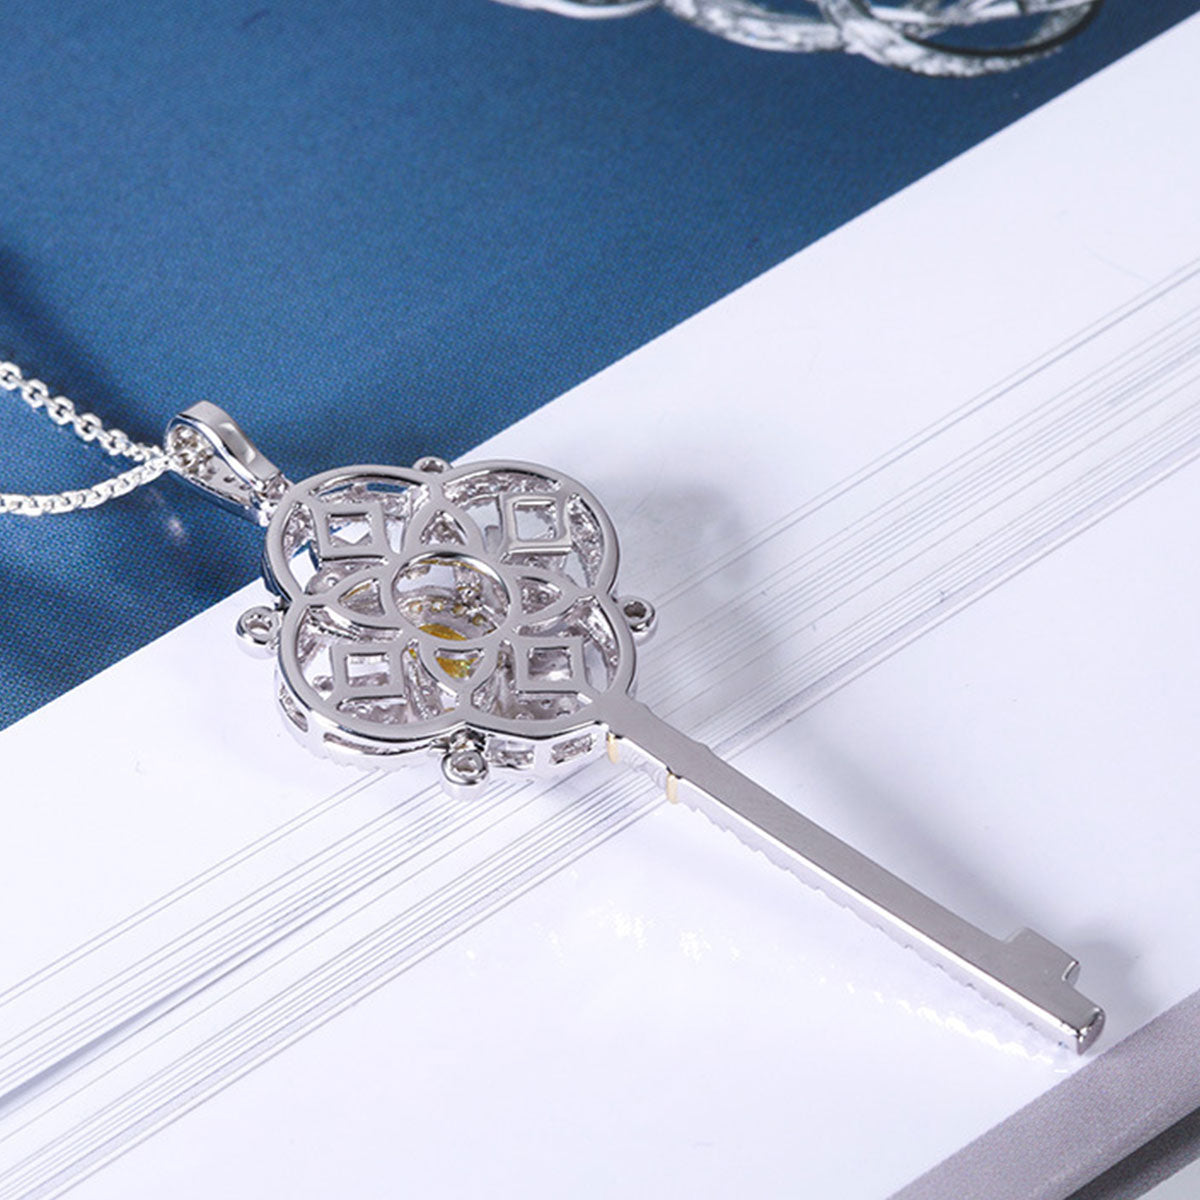 Sterling Silver Yellow Sapphire Four-leaf Clover Key Shape Necklace Pendant